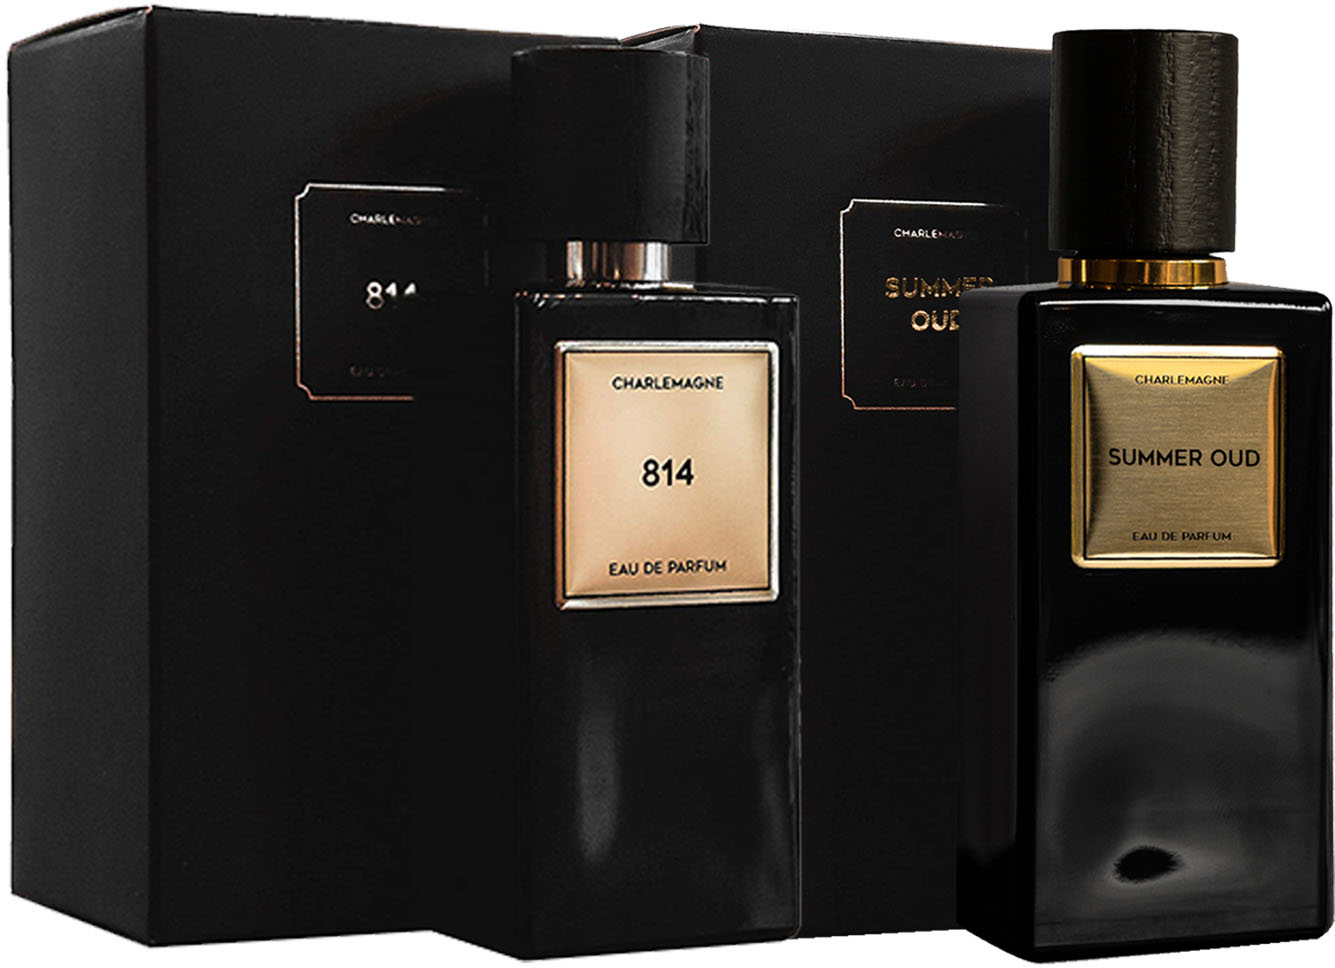 CHARLEMAGNE Duft-Set »The Scents«, (4 tlg.) kaufen | UNIVERSAL